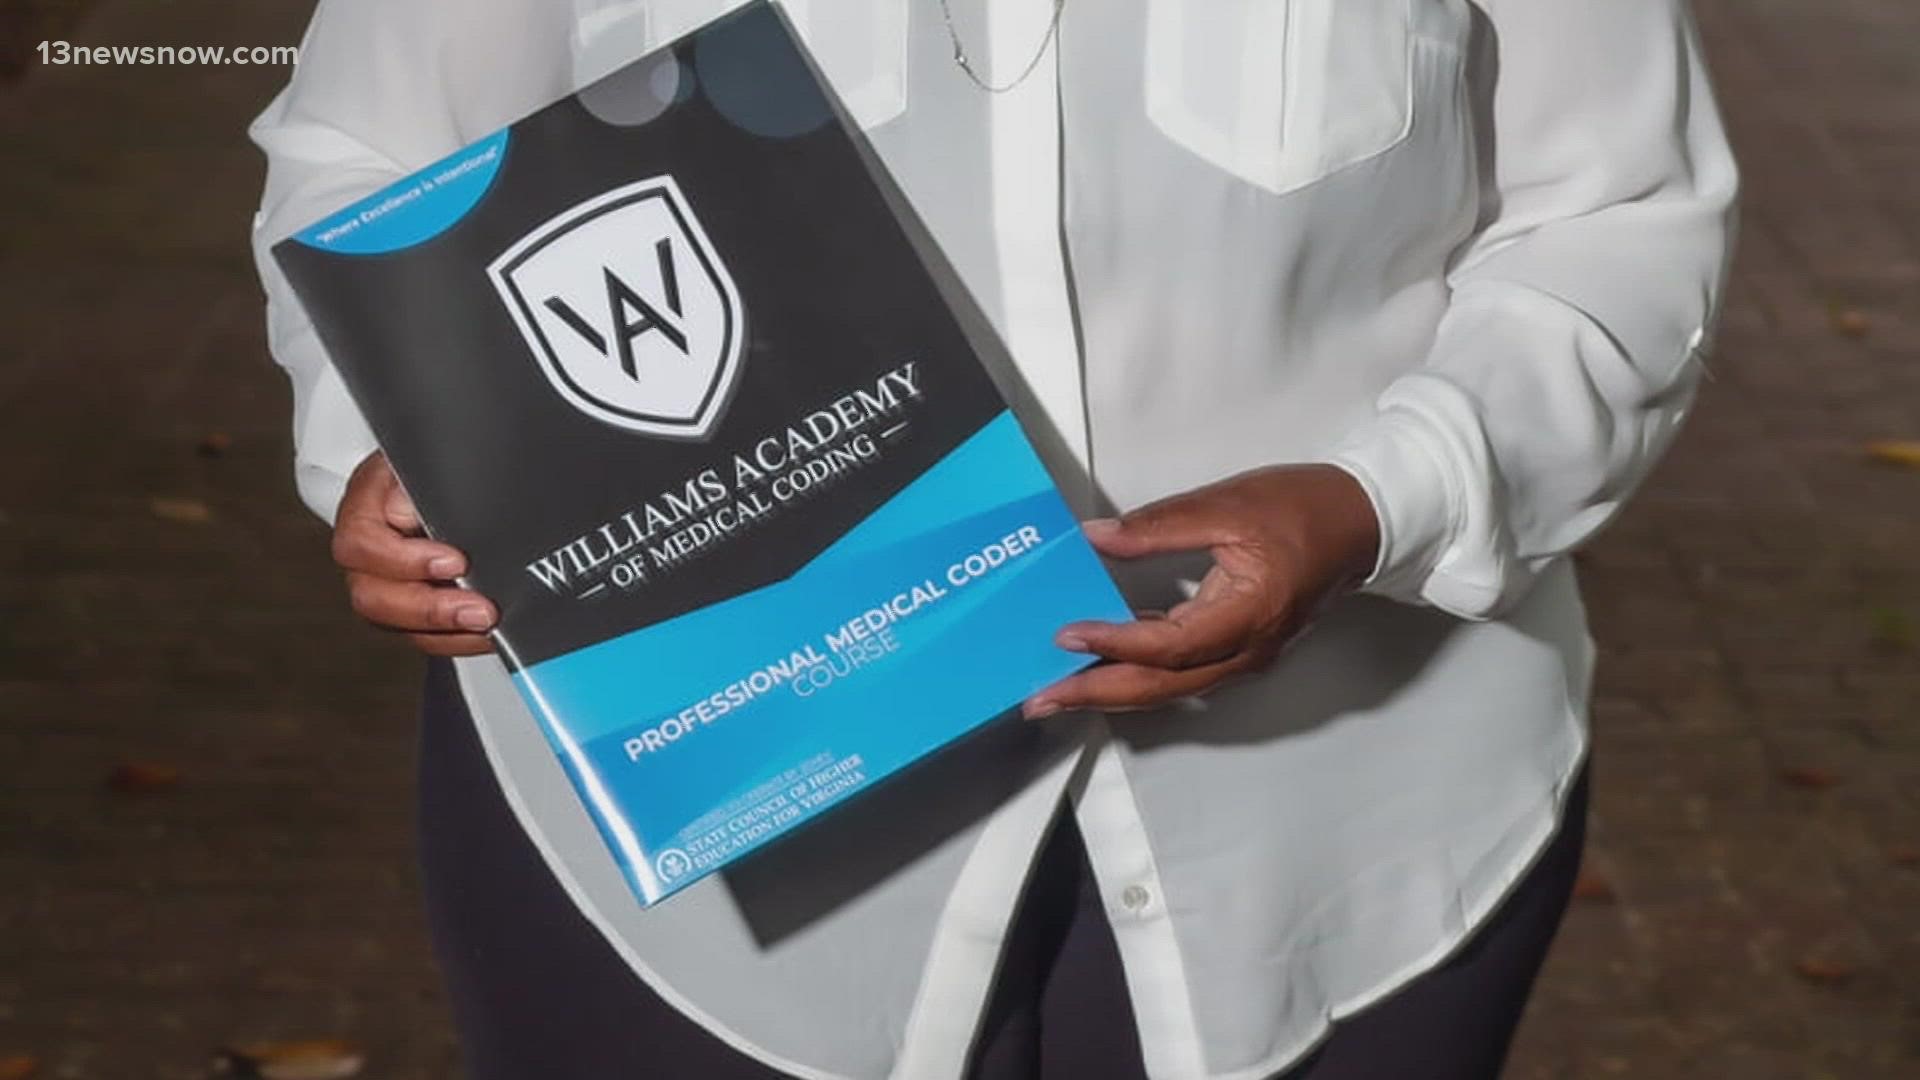 Lisa Smith, a health care professional opened the Williams Academy of Medical Coding in Virginia Beach to train job seekers entering the industry.